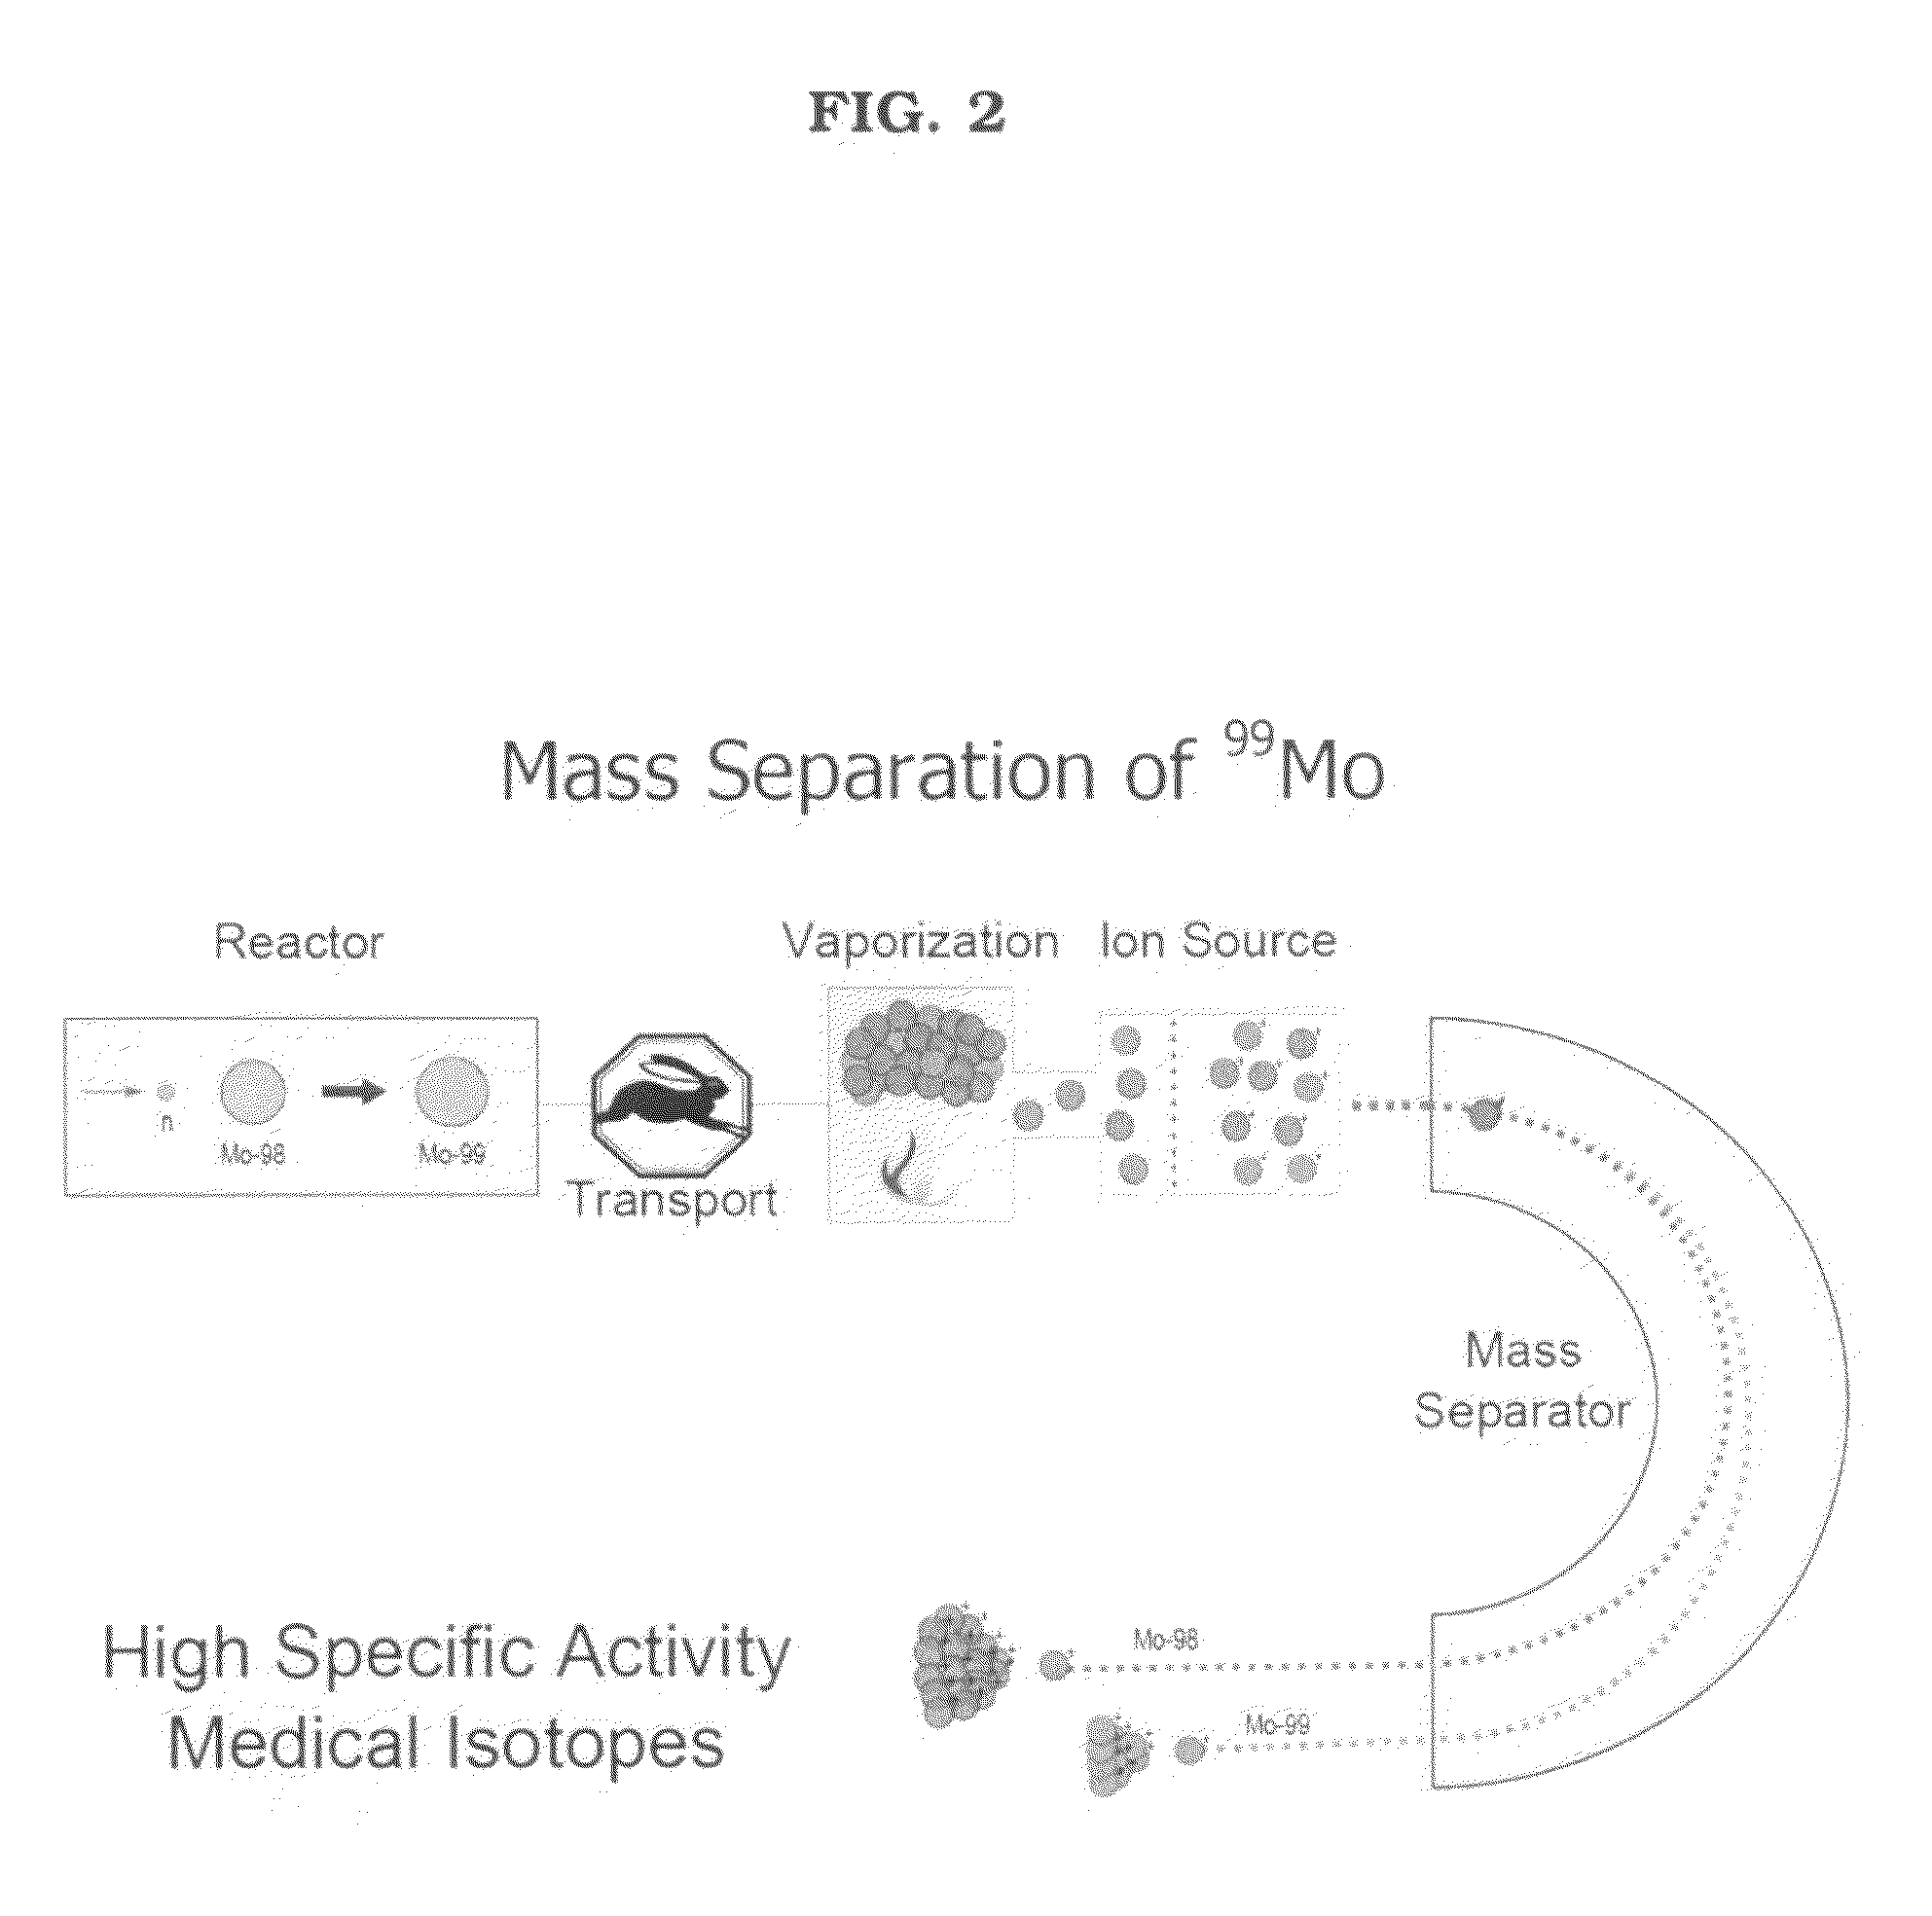 Method and apparatus for isolating the radioisotope molybdenum-99